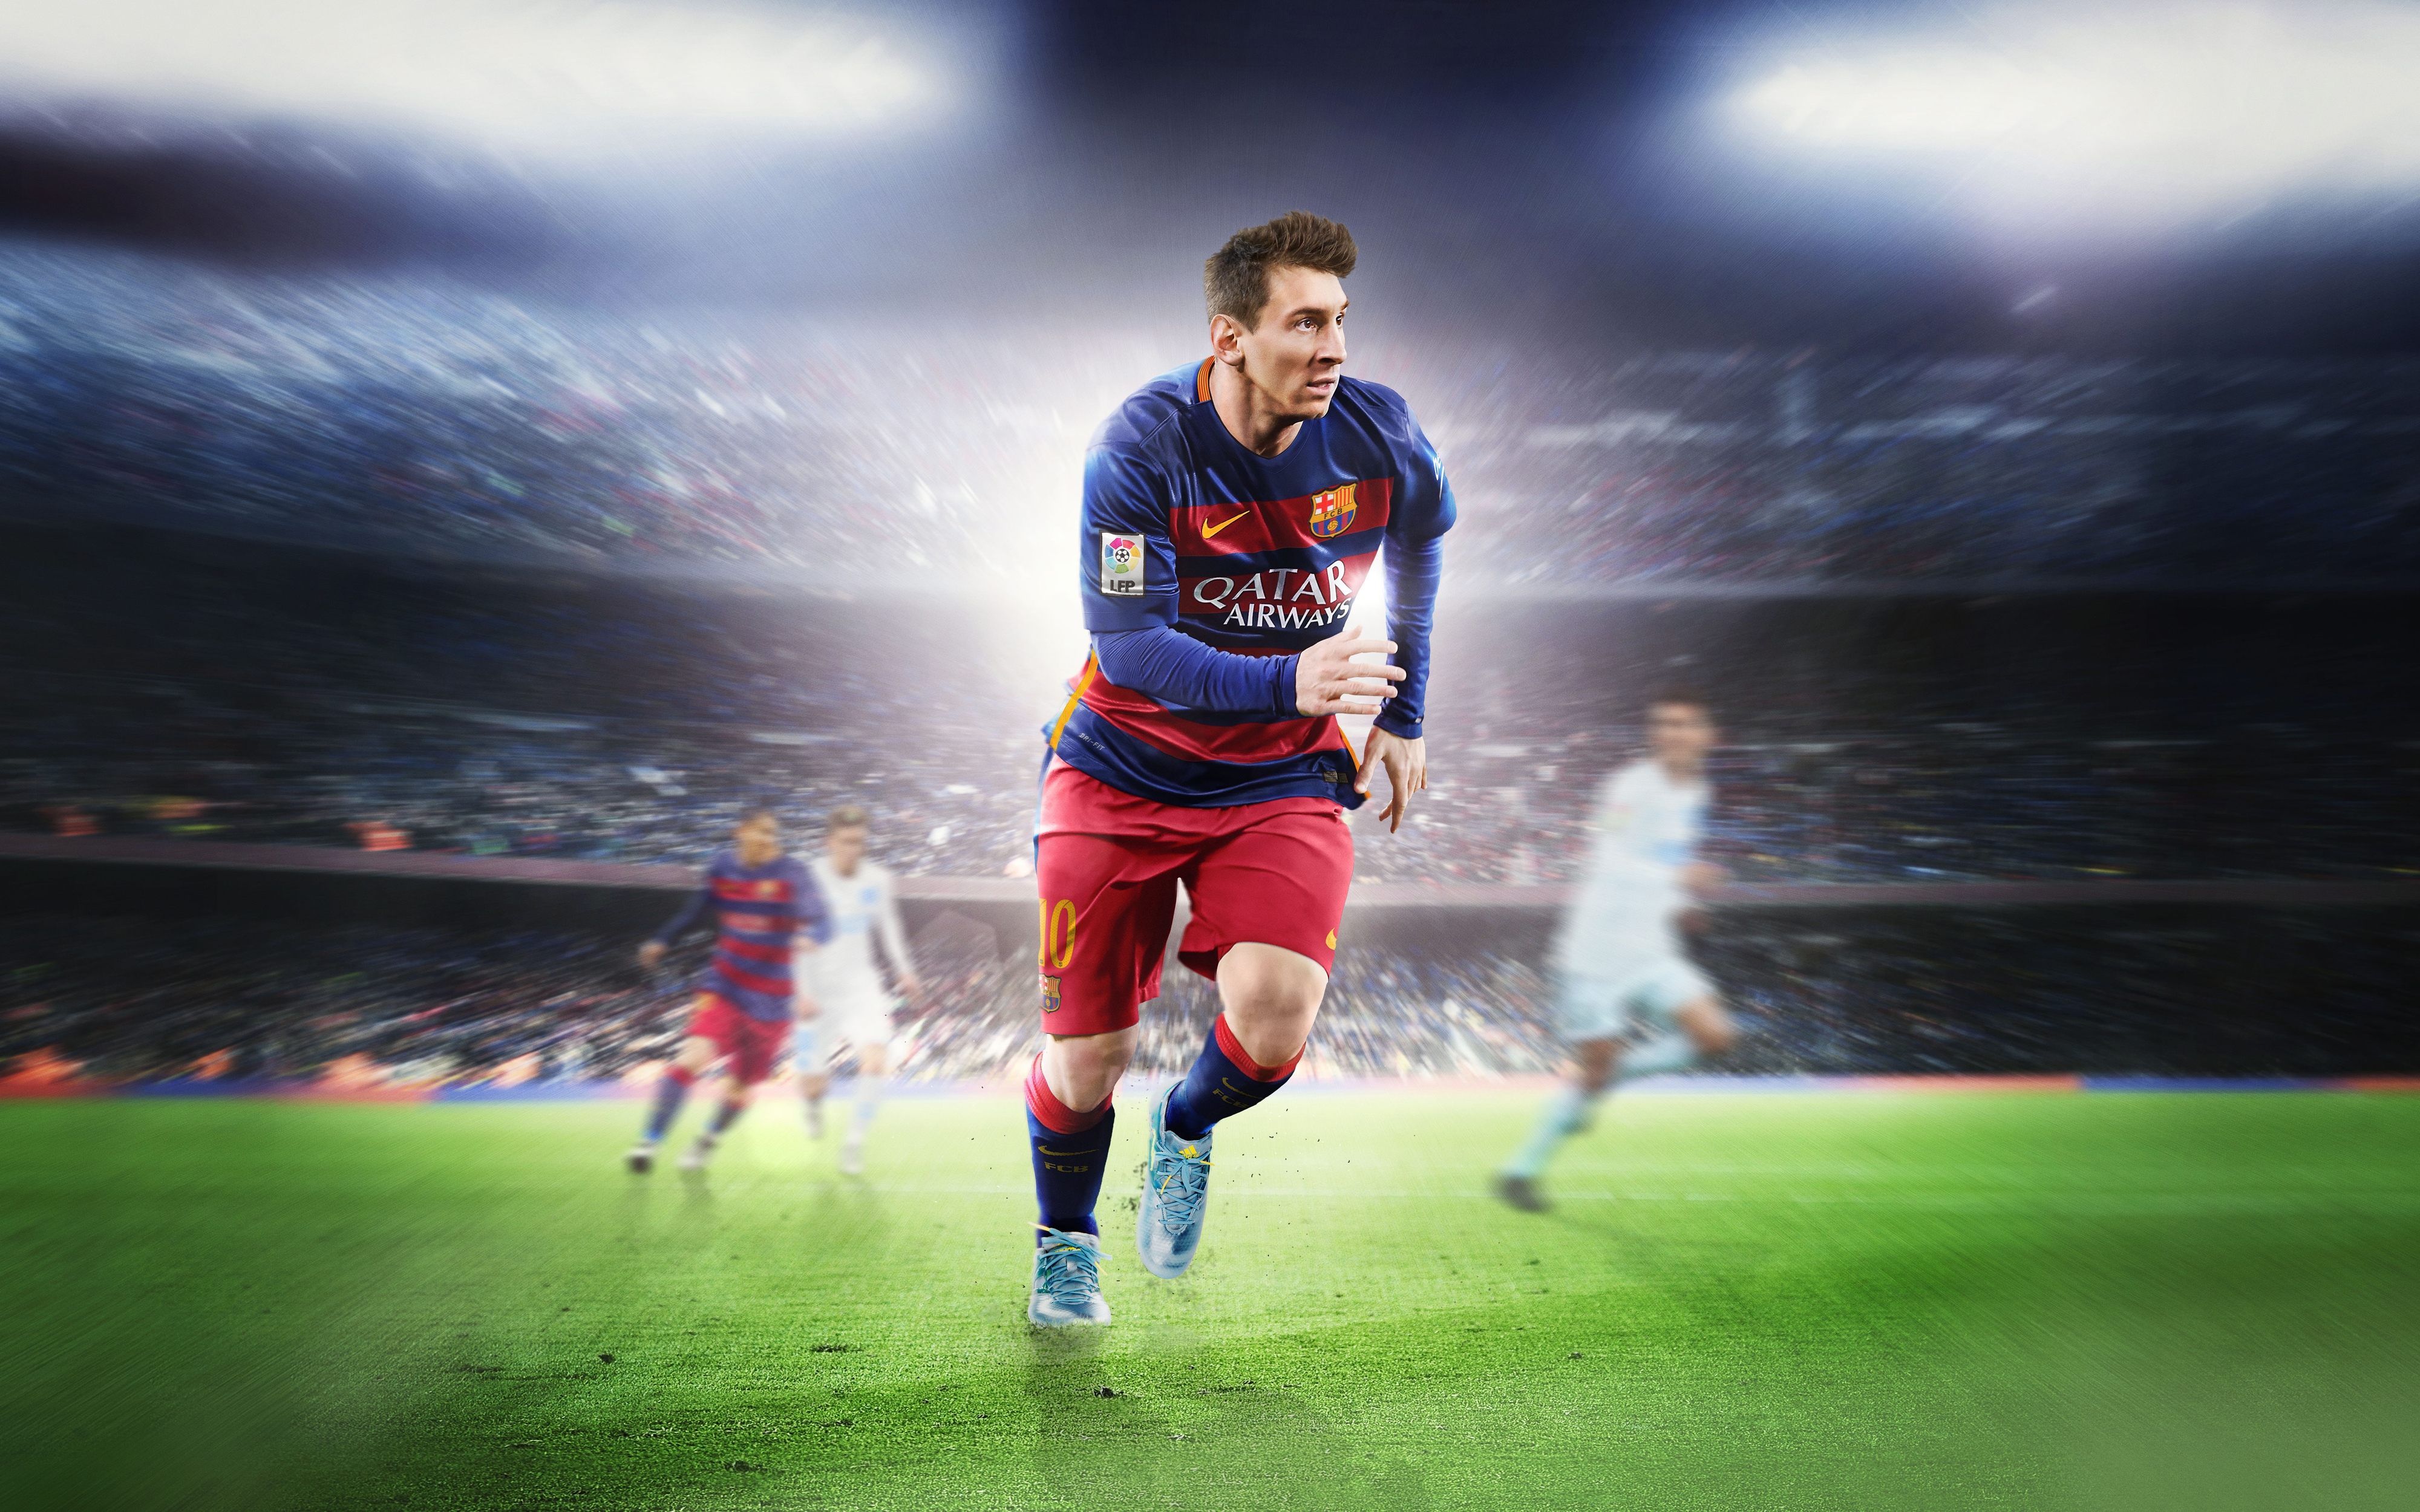 Wallpapers lionel messi barselona football on the desktop